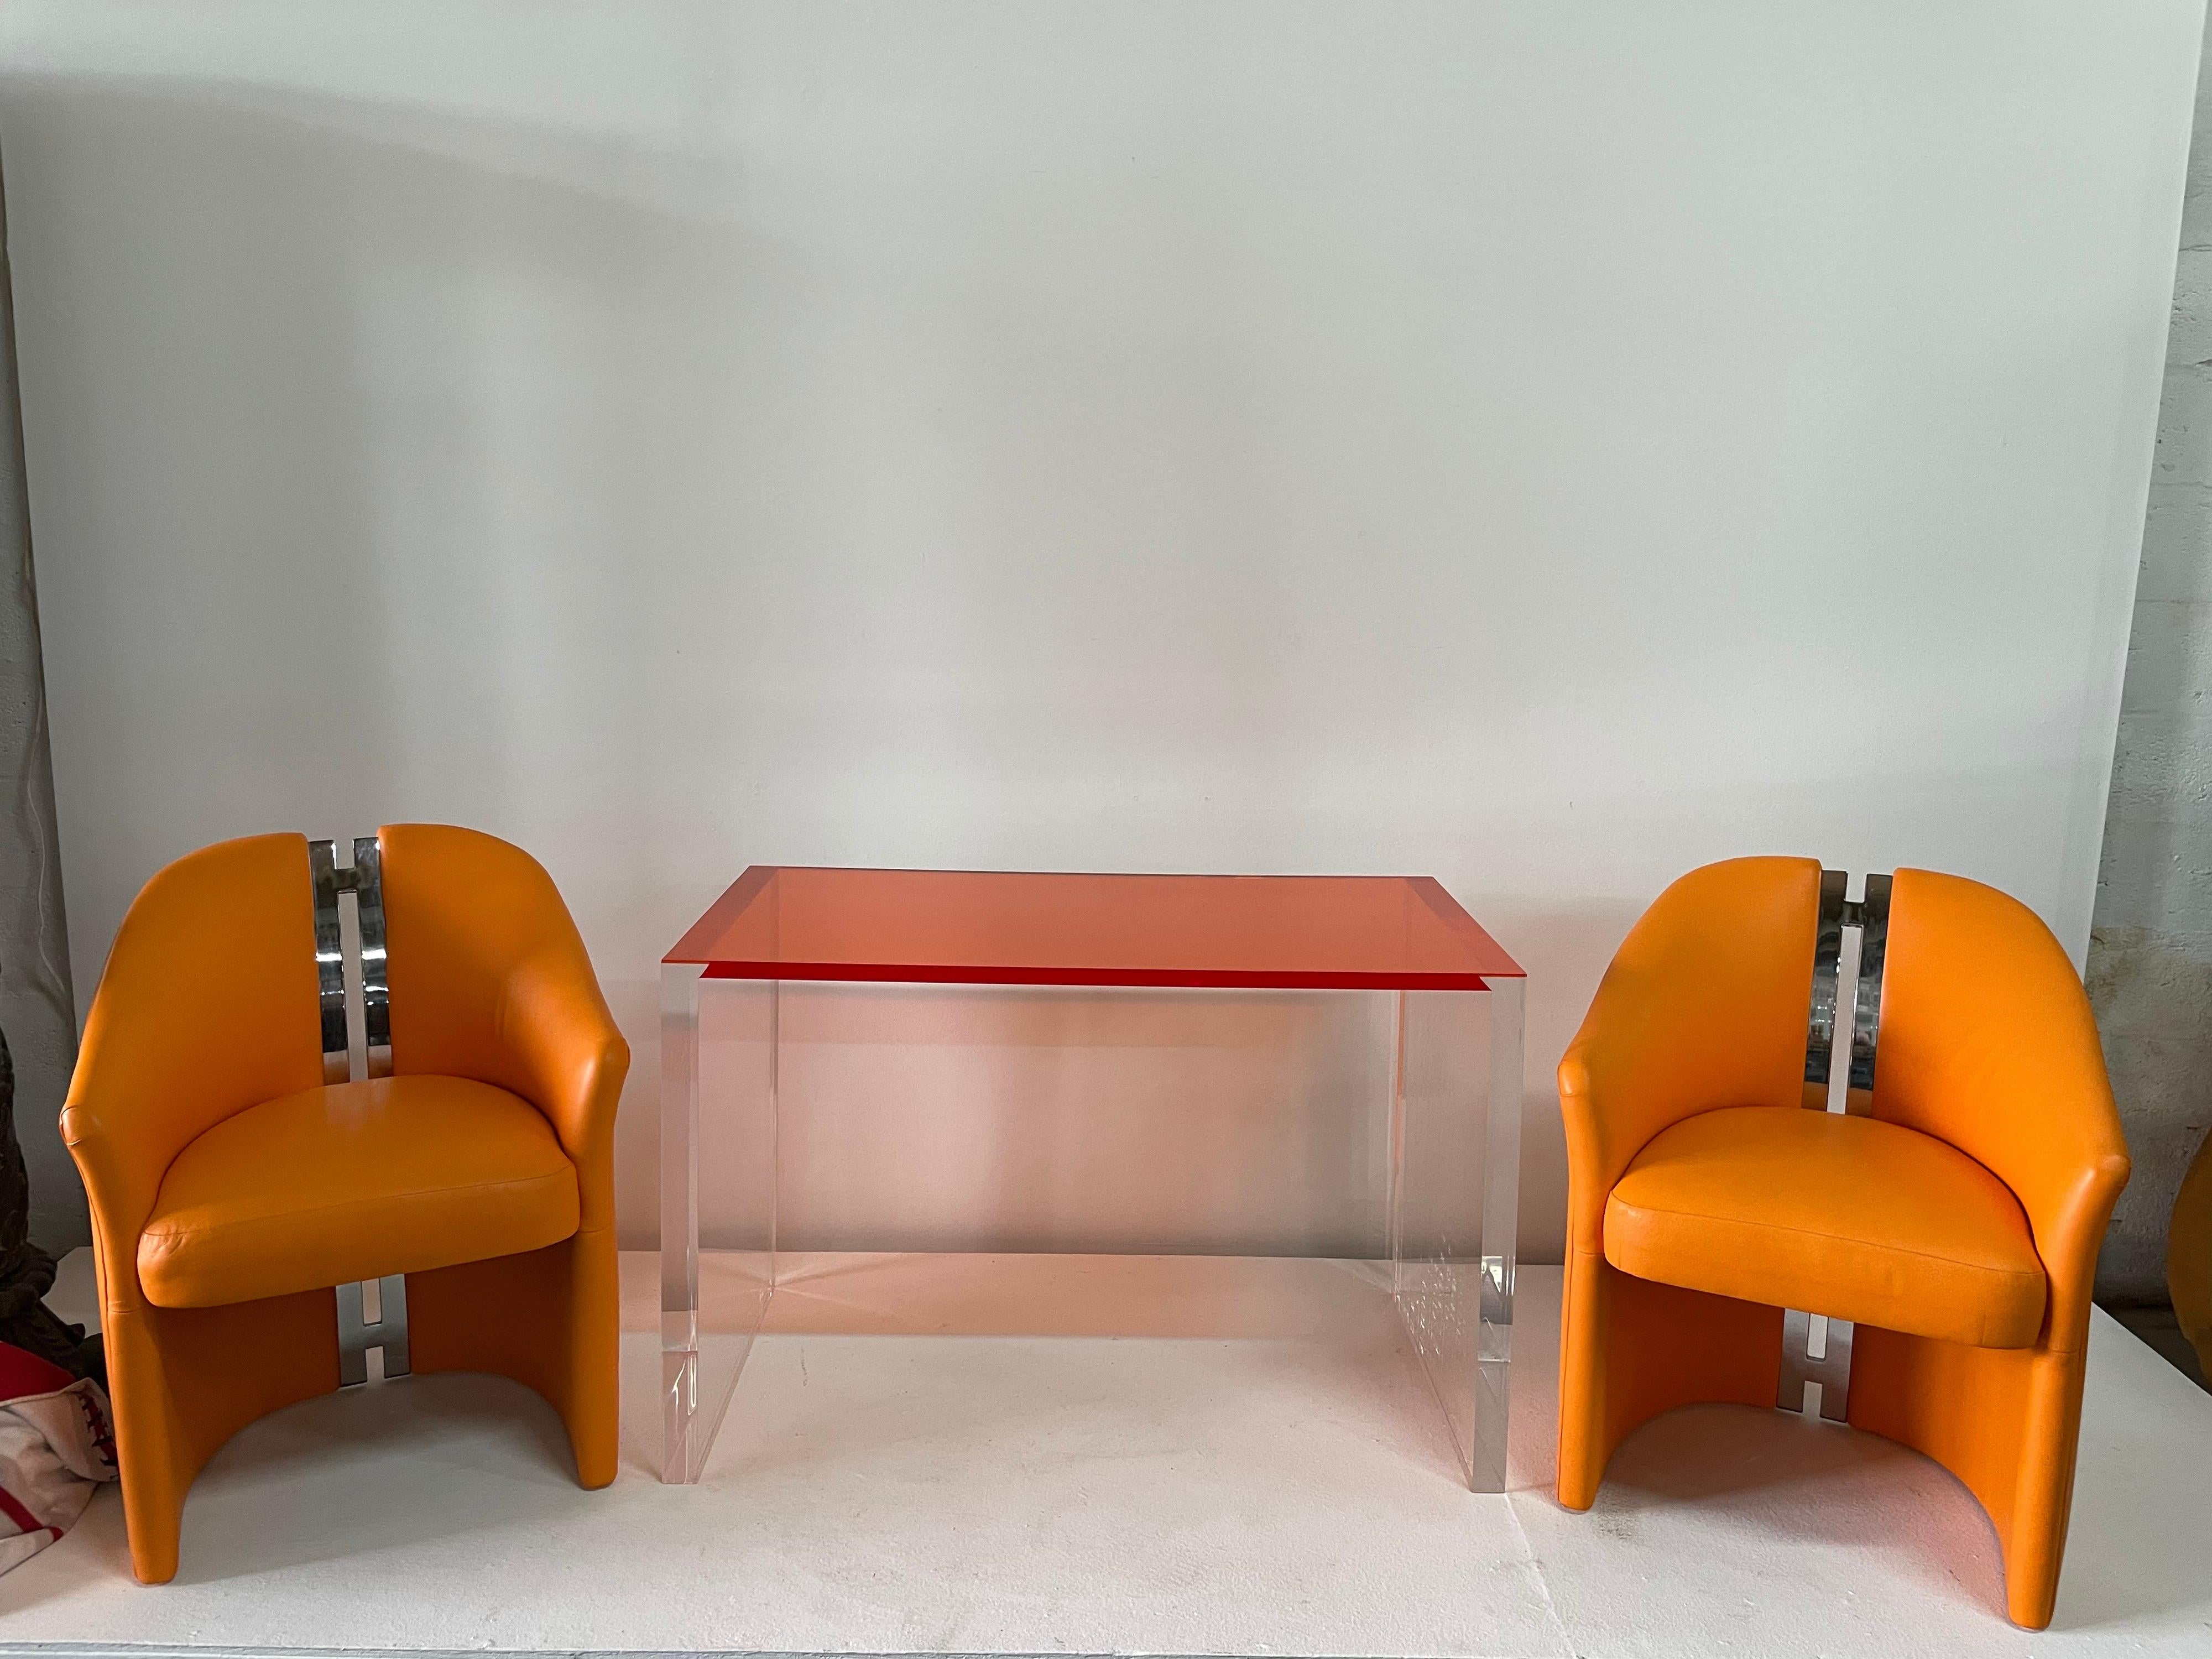 Orange Acrylic Top Desk/ Game Table In Excellent Condition For Sale In East Hampton, NY